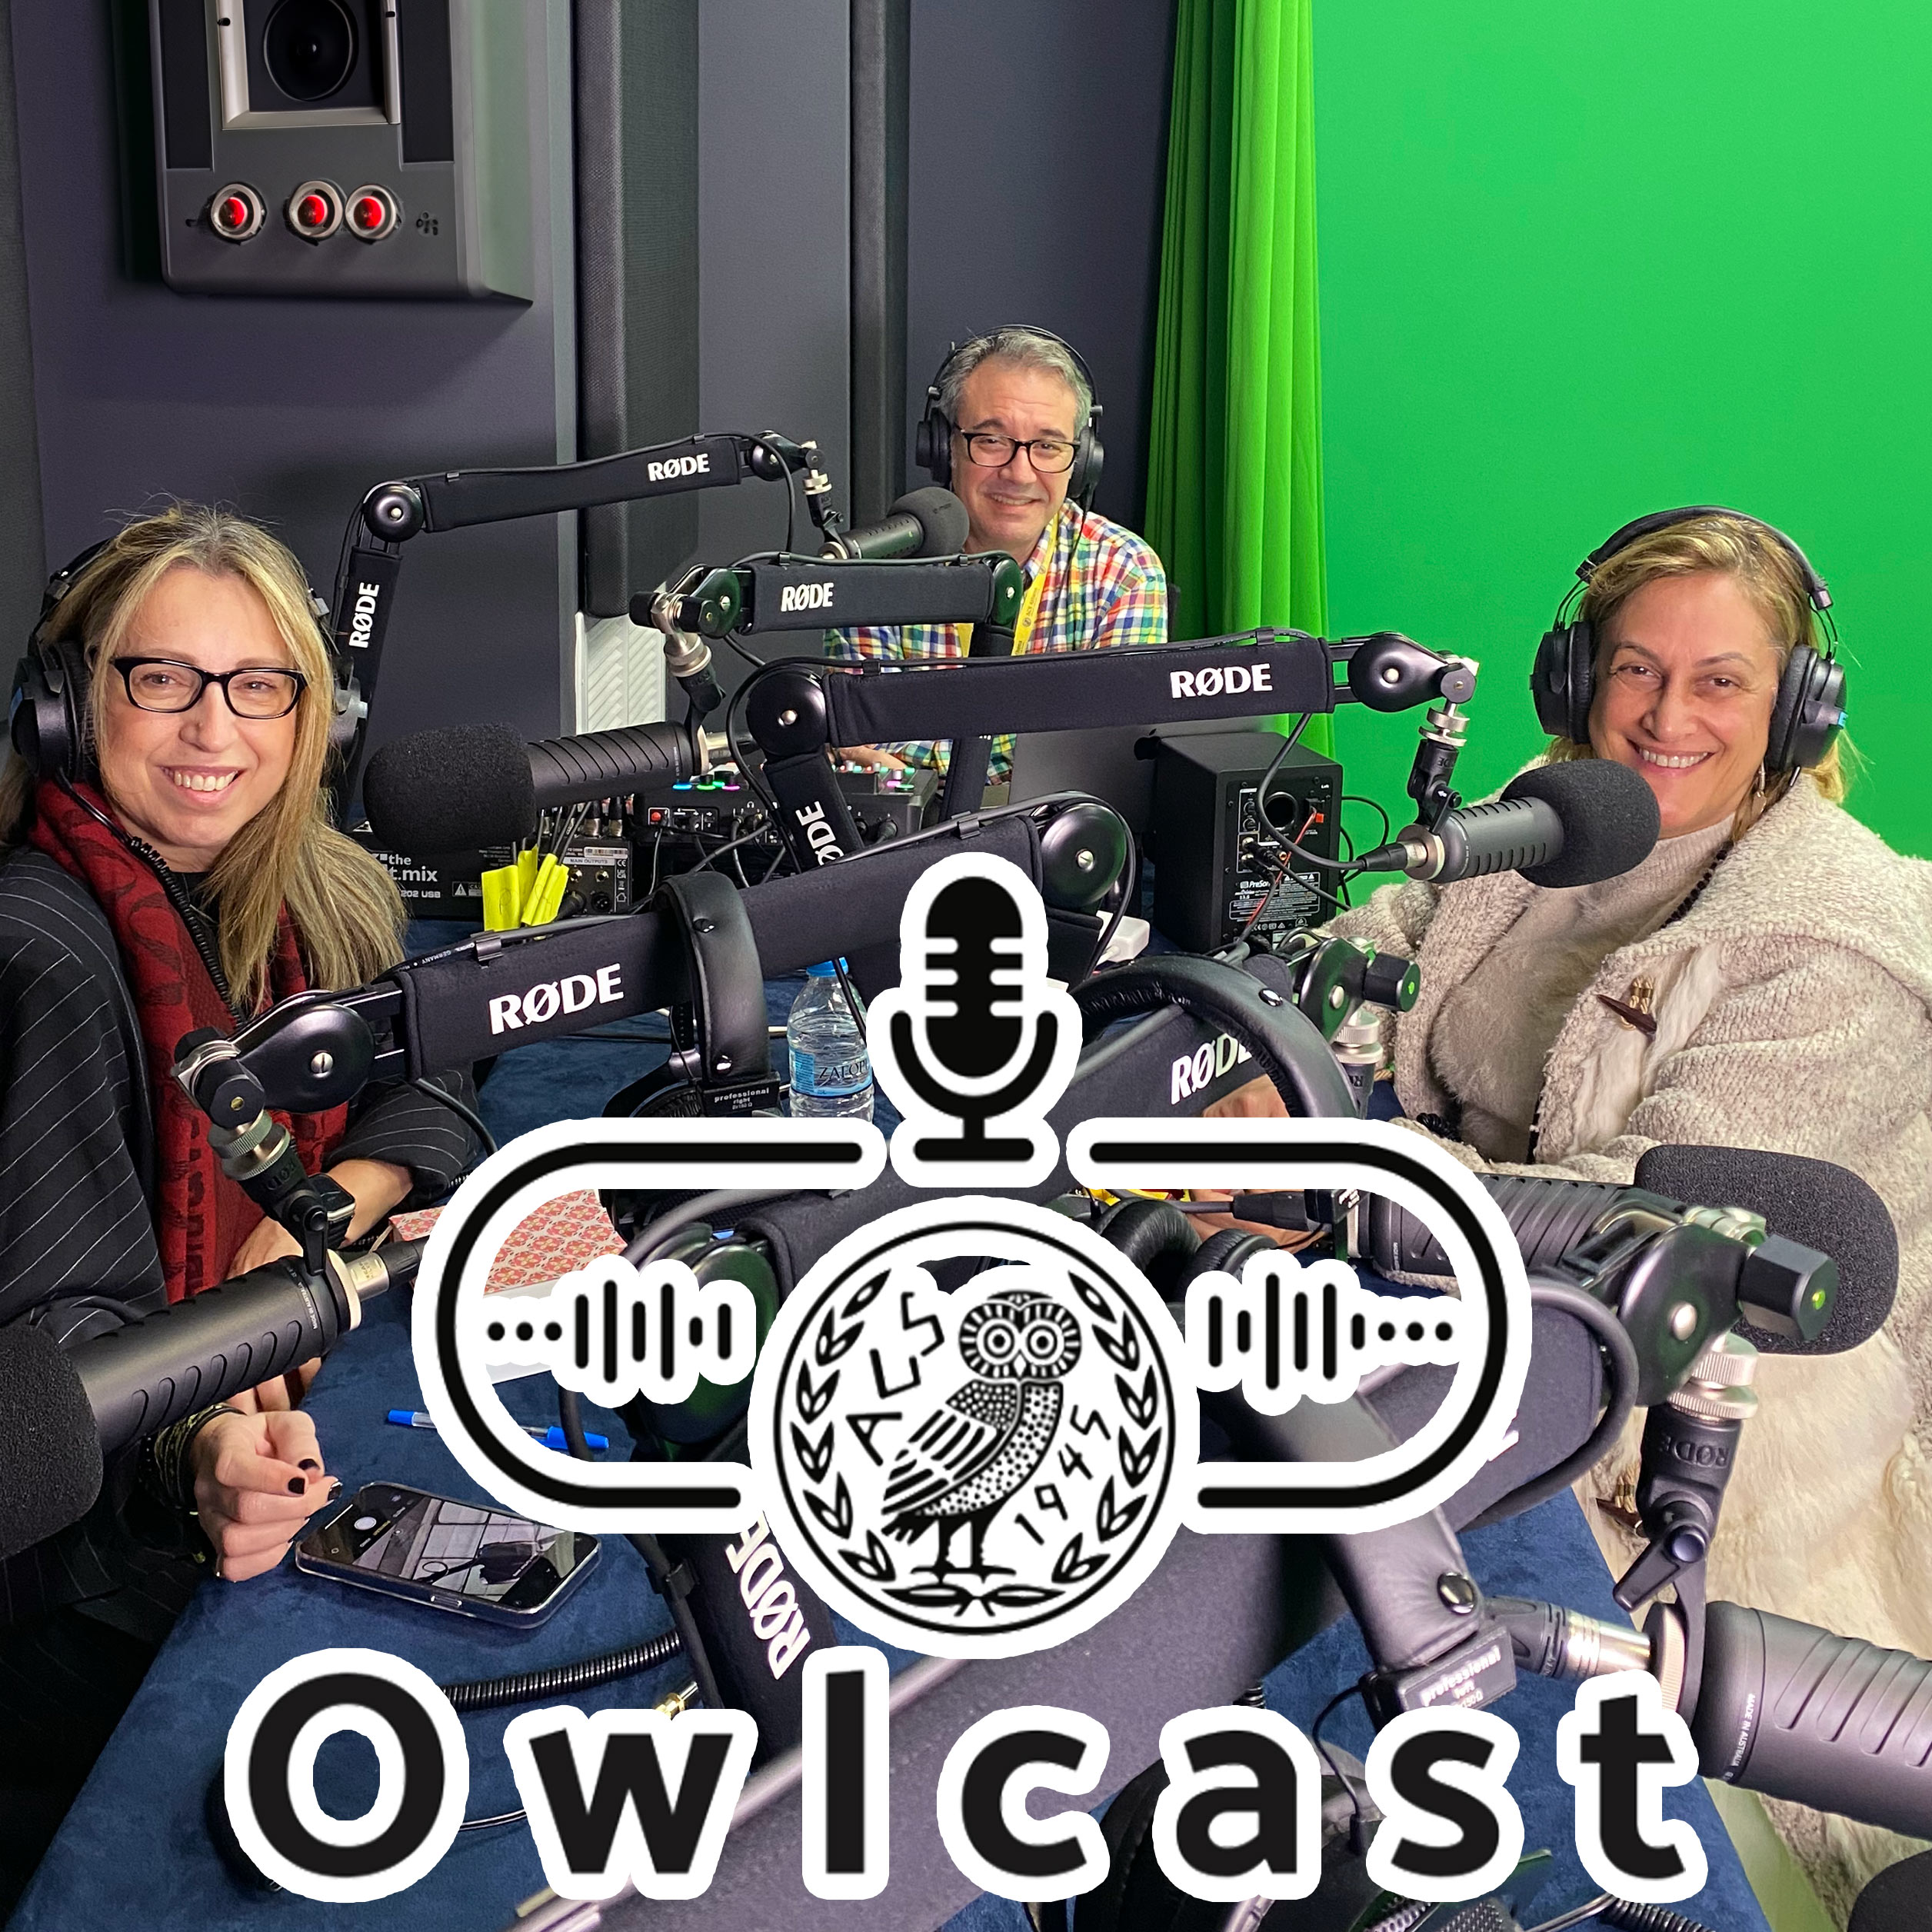 Owlcast 82 -- Navigating Admissions in International Education - w/Fran Tottas & Jenny Grigoropoulos